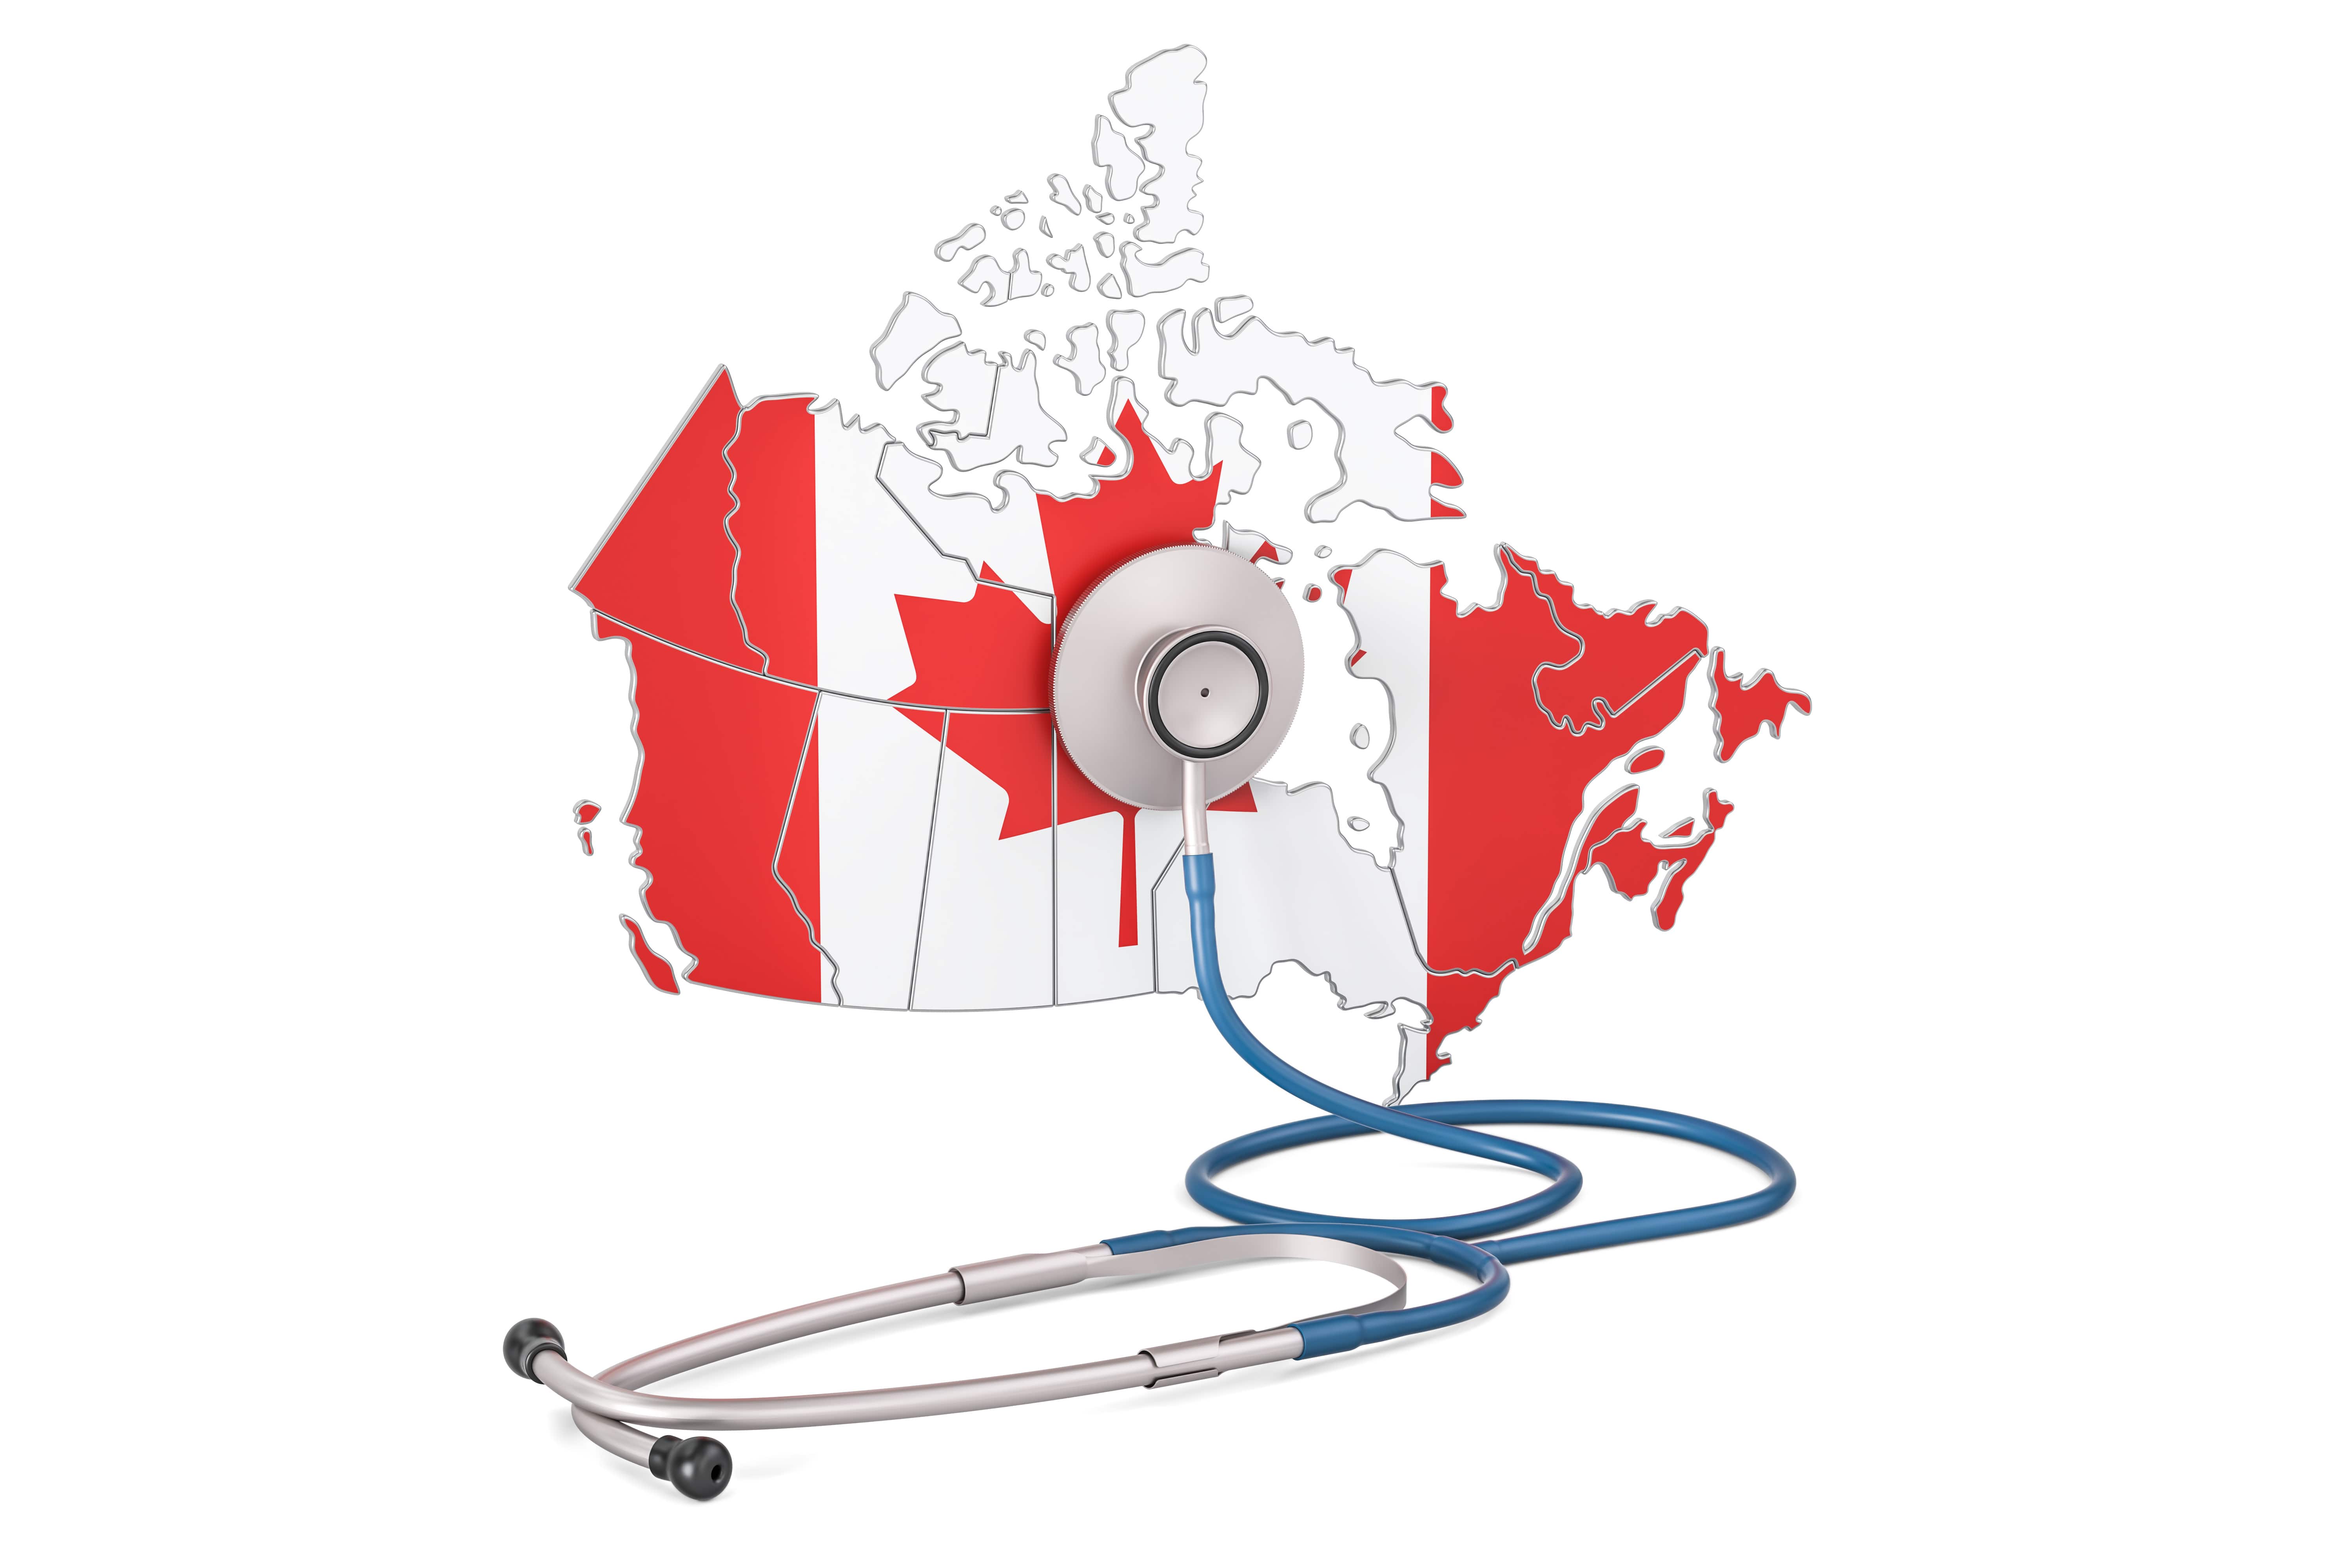 How Much Does Health Insurance Cost in Canada?